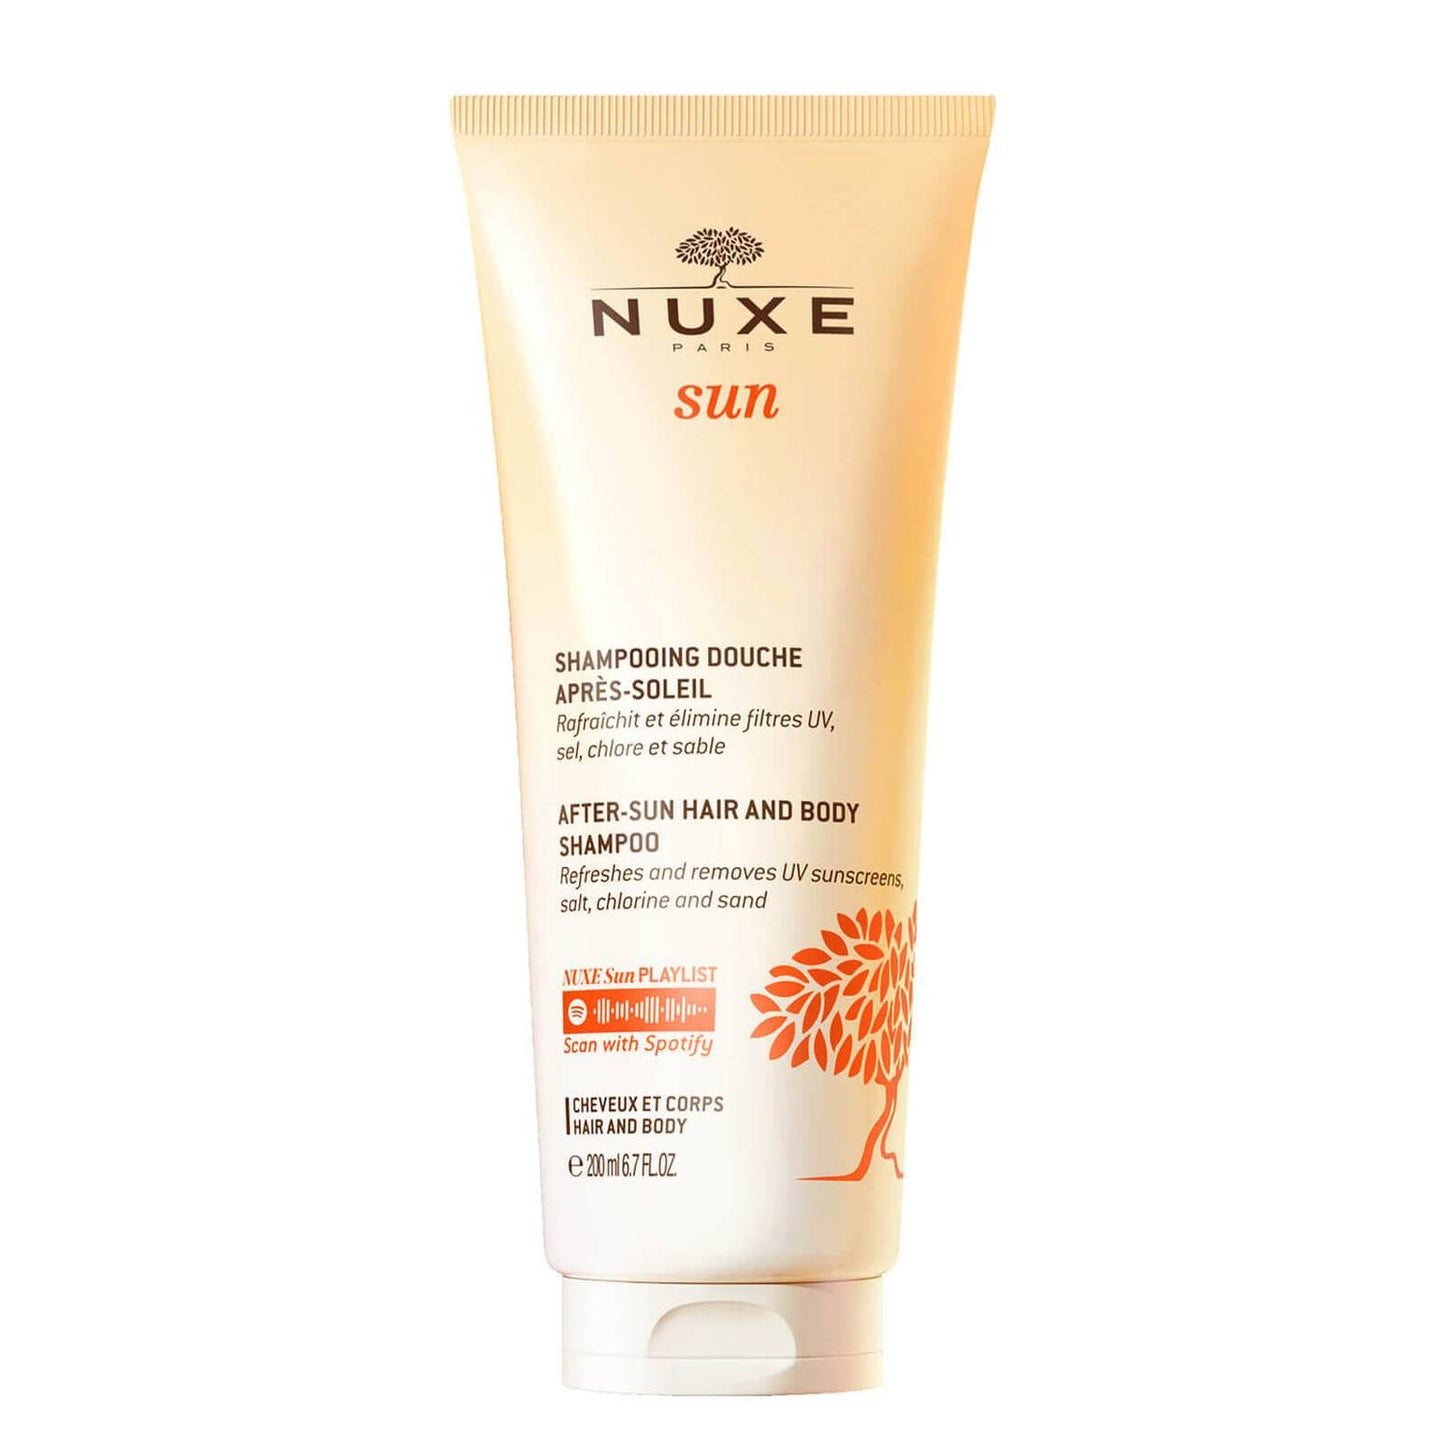 Nuxe Sun - After-Sun Hair and Body Shampoo refreshes and removes UV sunscreens, salt, chlorine and sand.